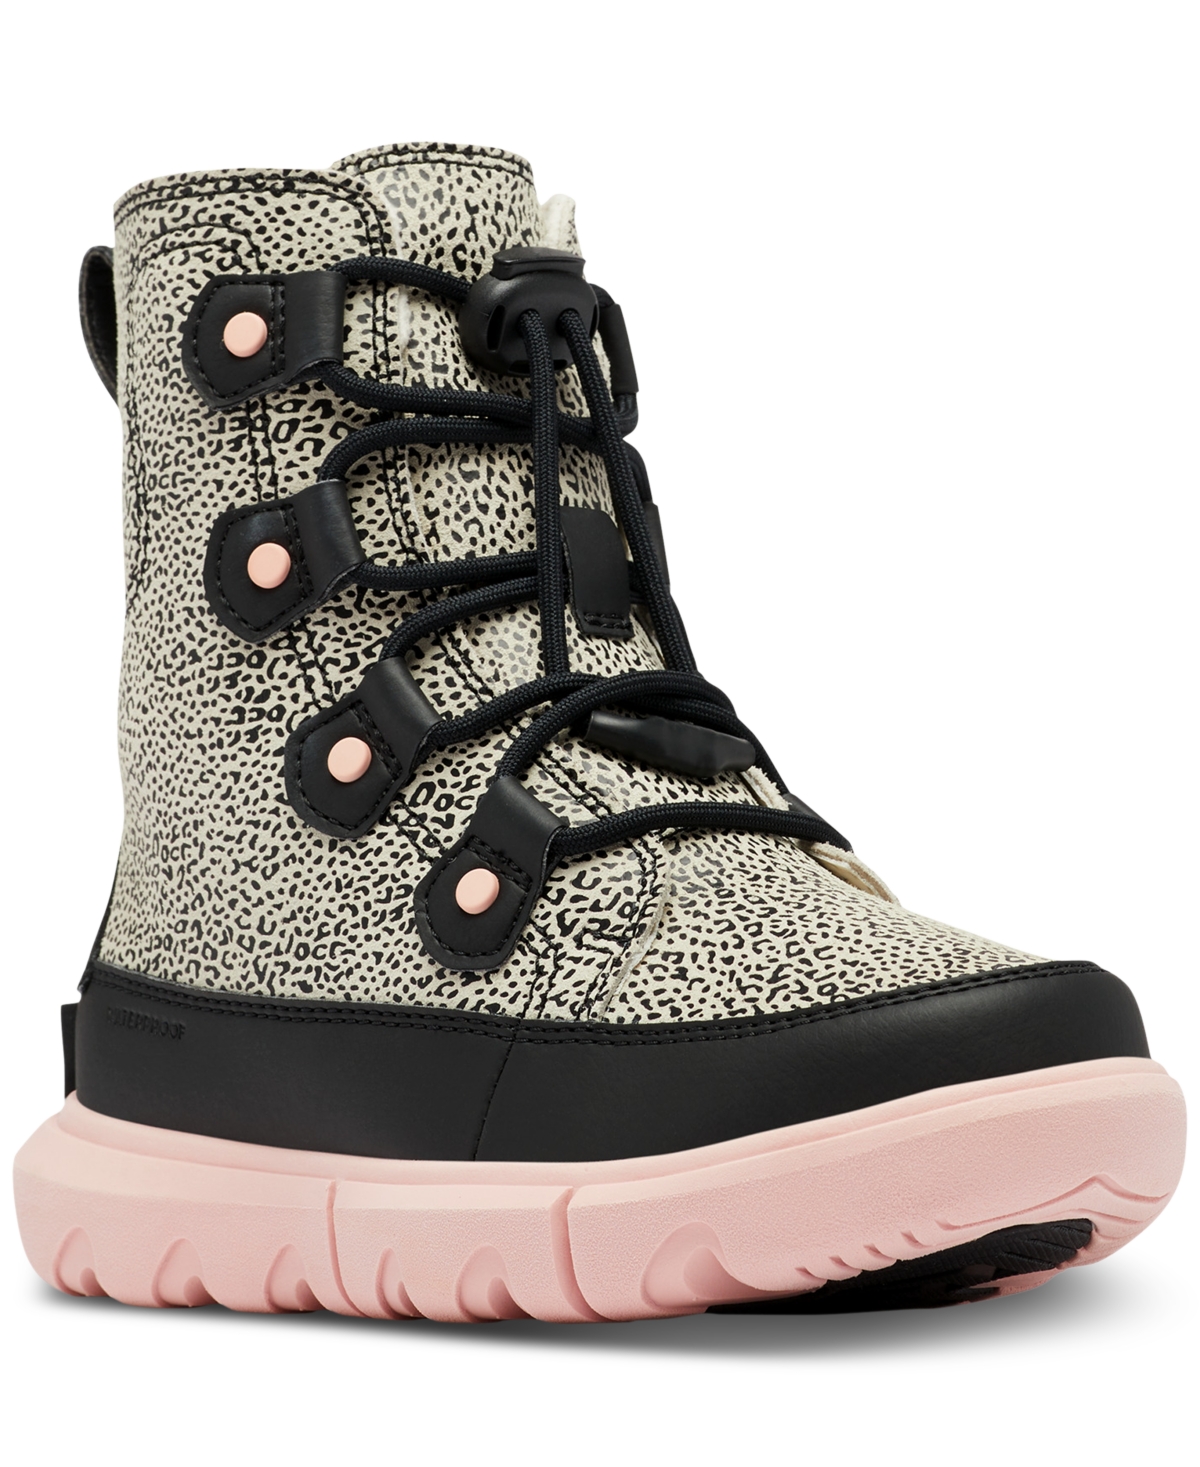 SOREL YOUTH EXPLORER LACE-UP WATERPROOF COLD-WEATHER BOOTS